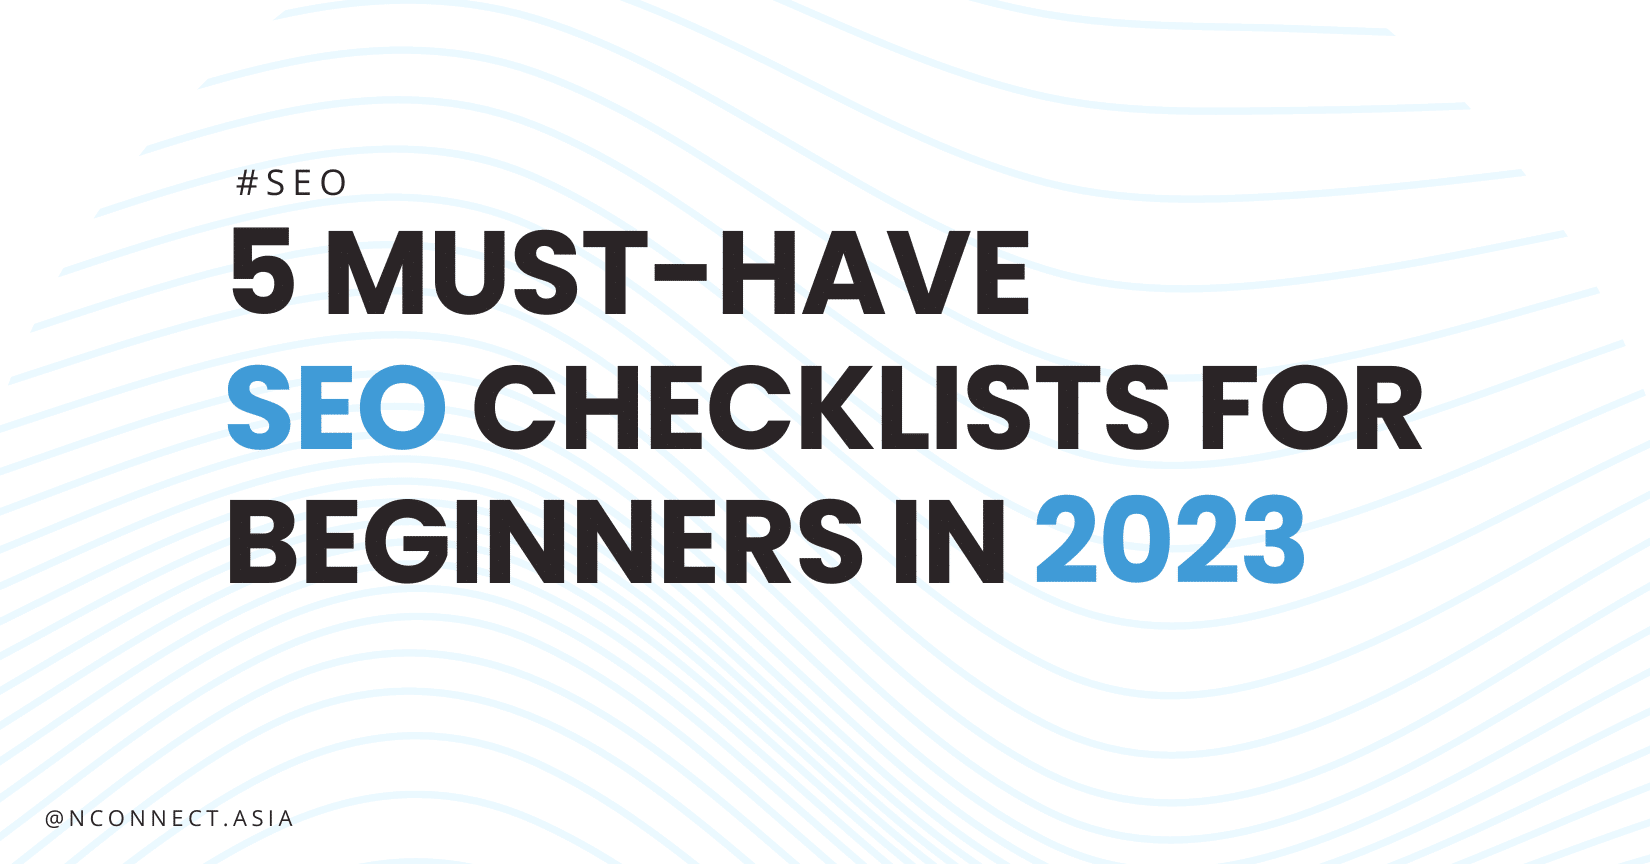 5 Must-Have SEO Checklists for Beginners in 2023